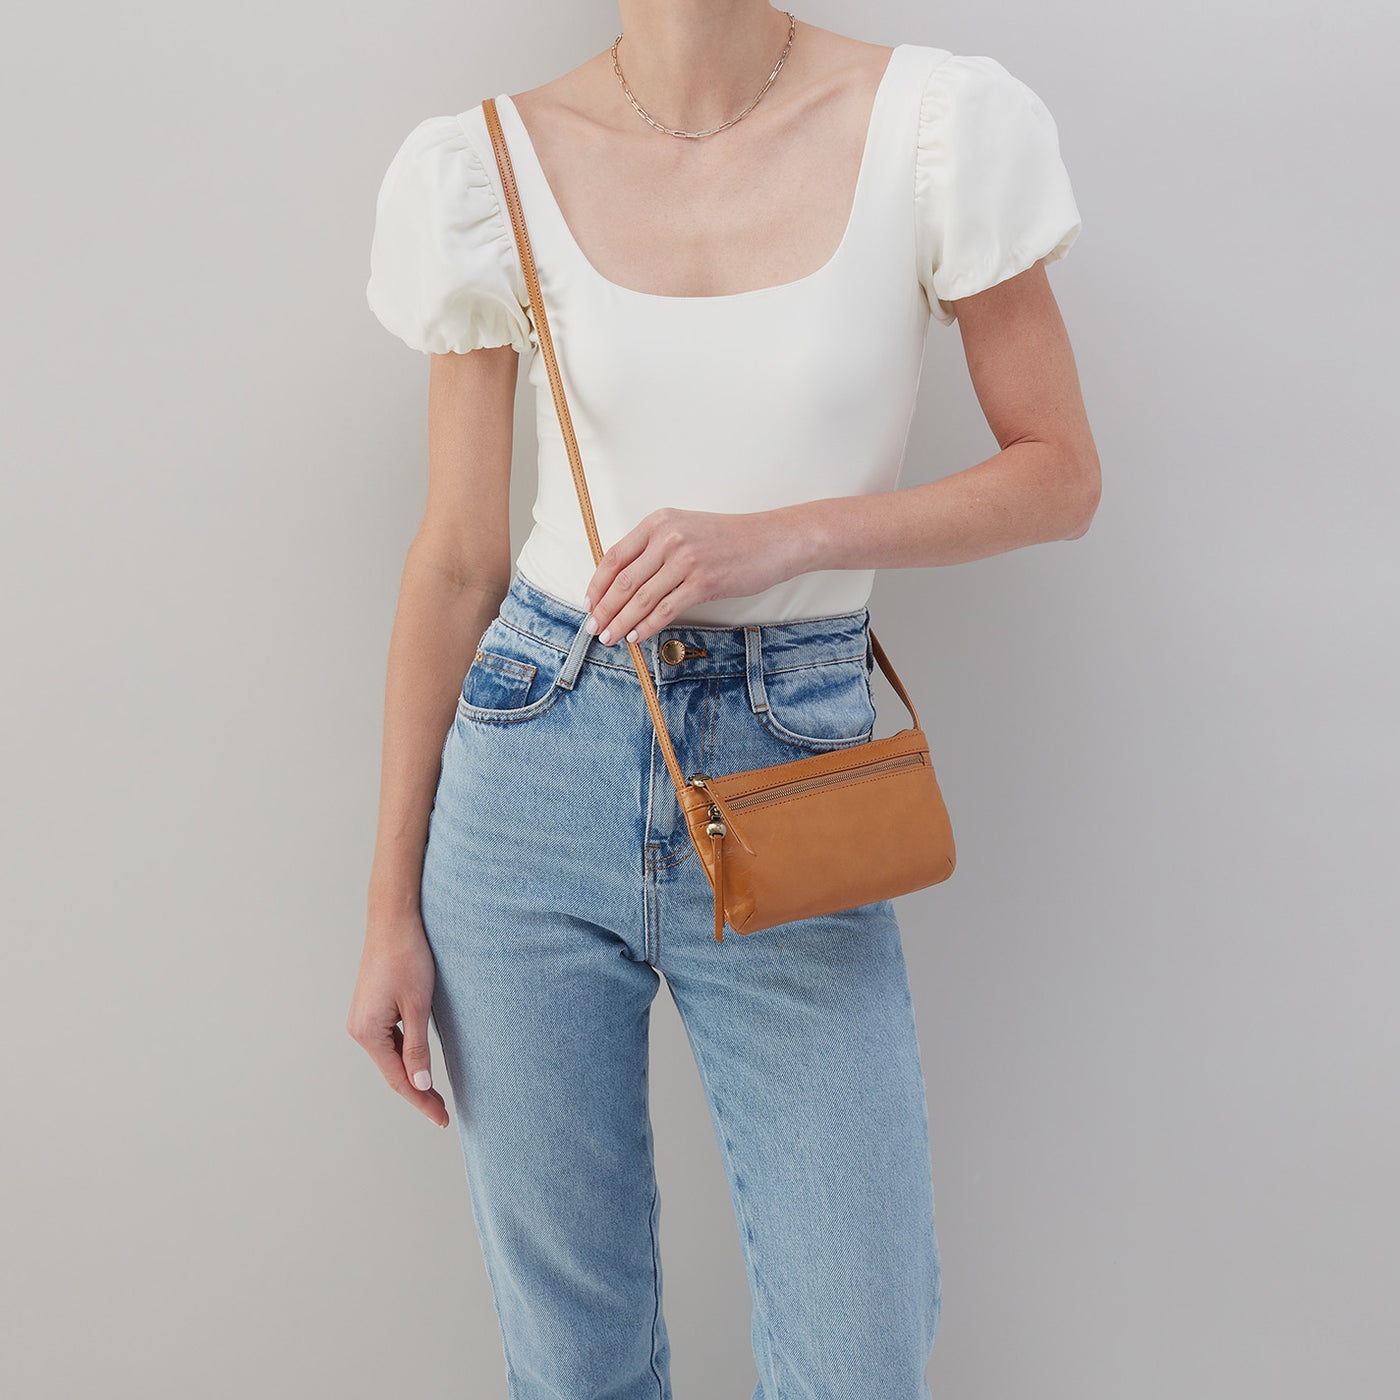 Cara Crossbody In Polished Leather - Hibiscus